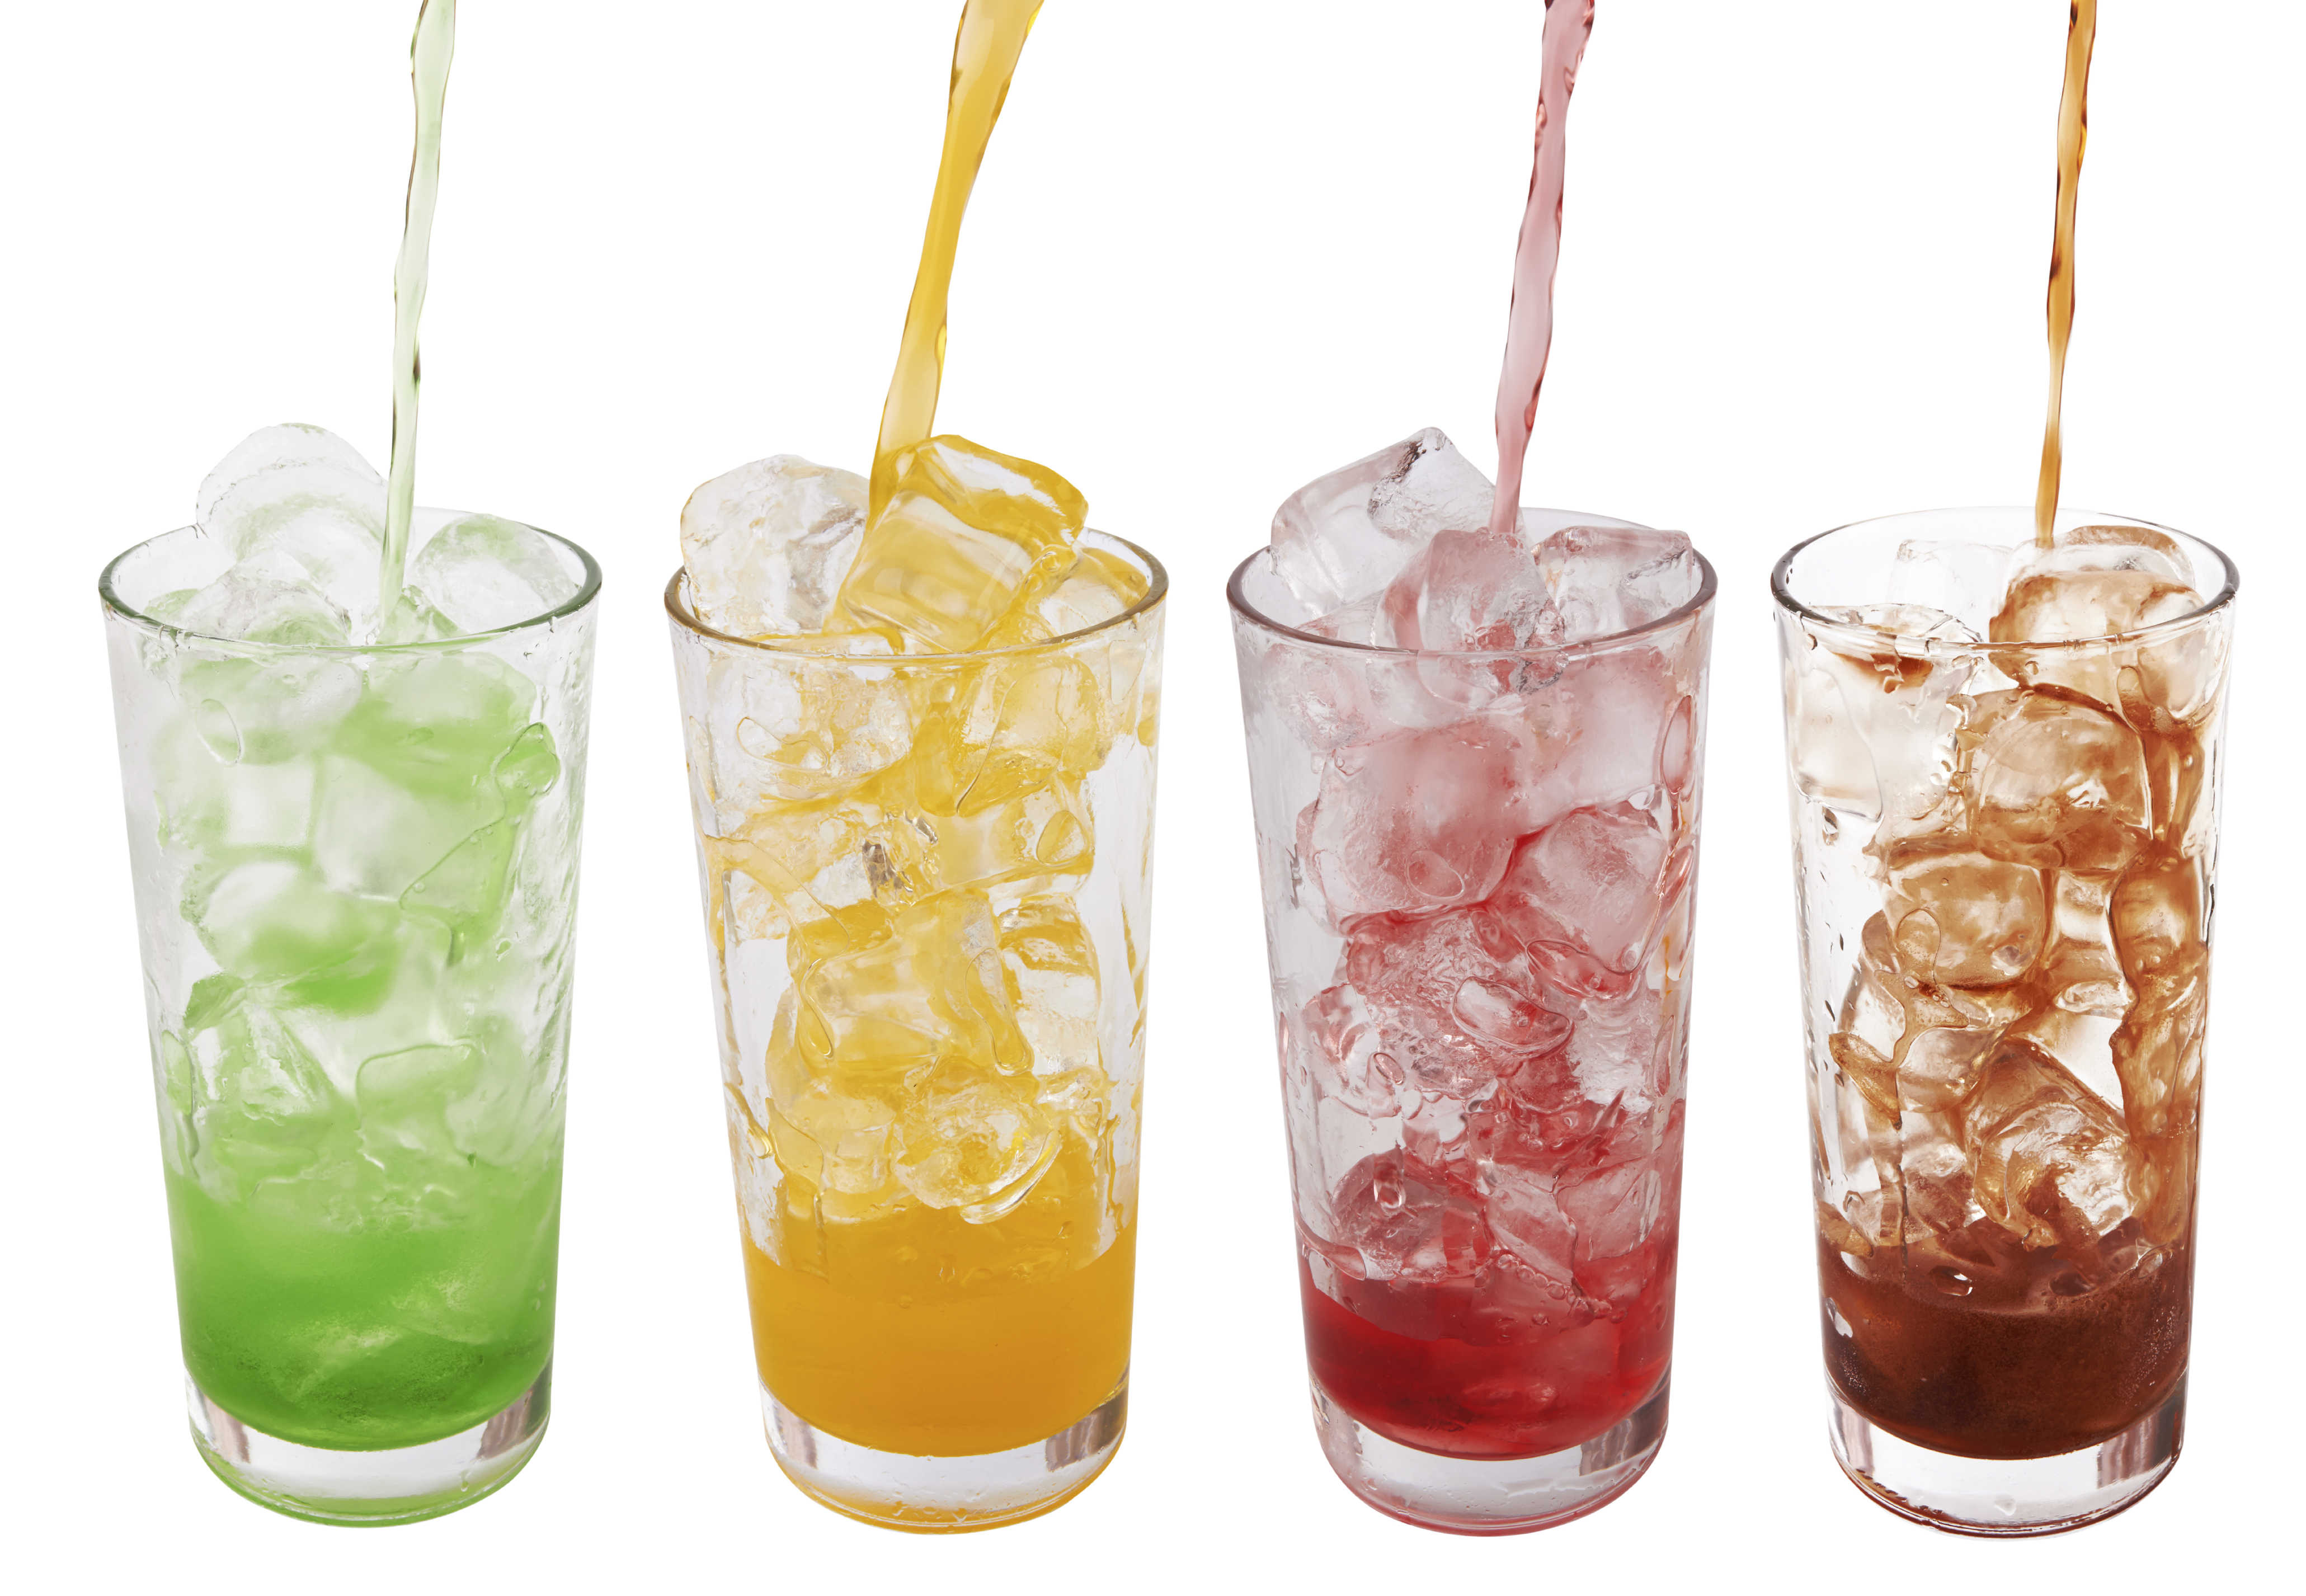 Degenerative Drinks: Damaging To More Than Your Teeth